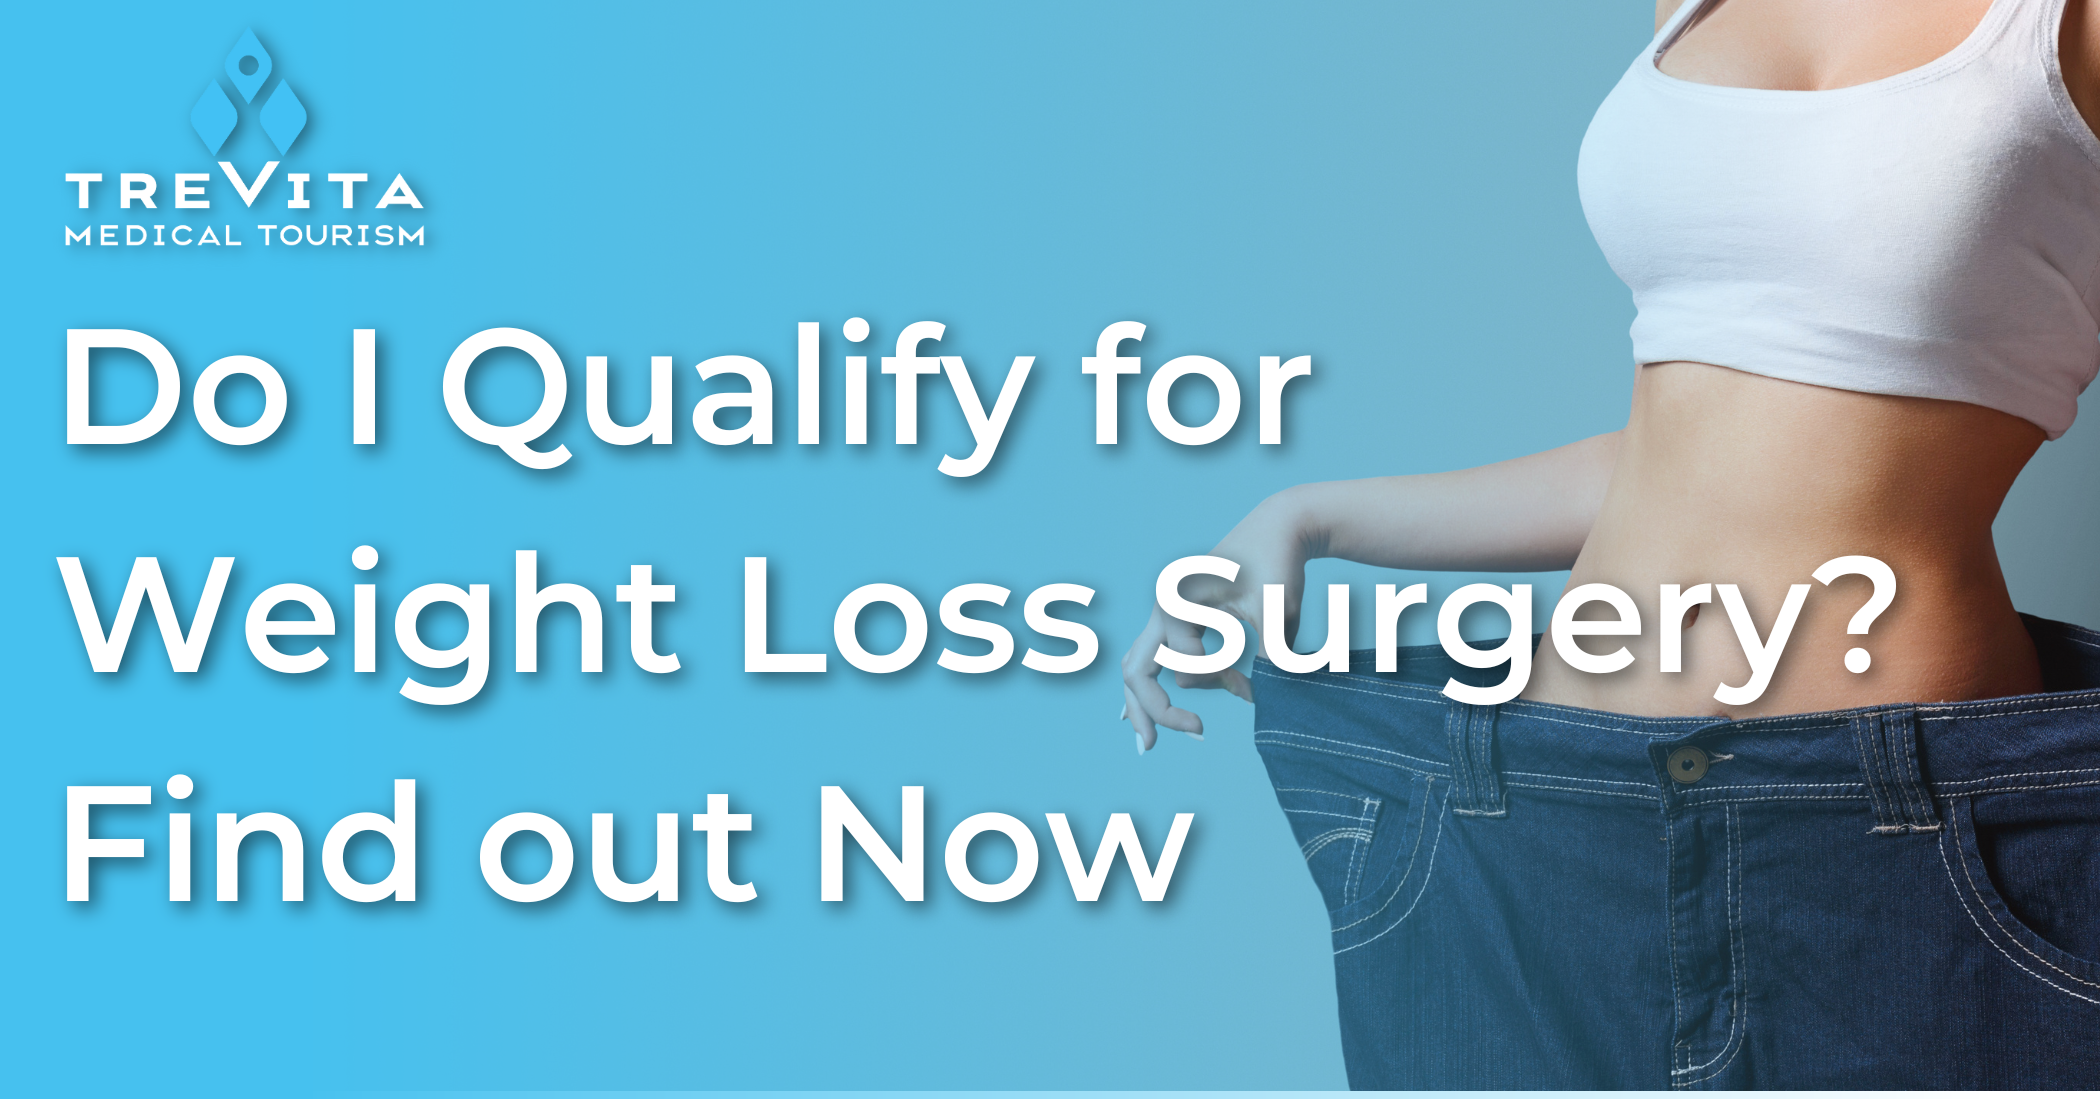 Do I Qualify for Weight Loss Surgery? Find out Now